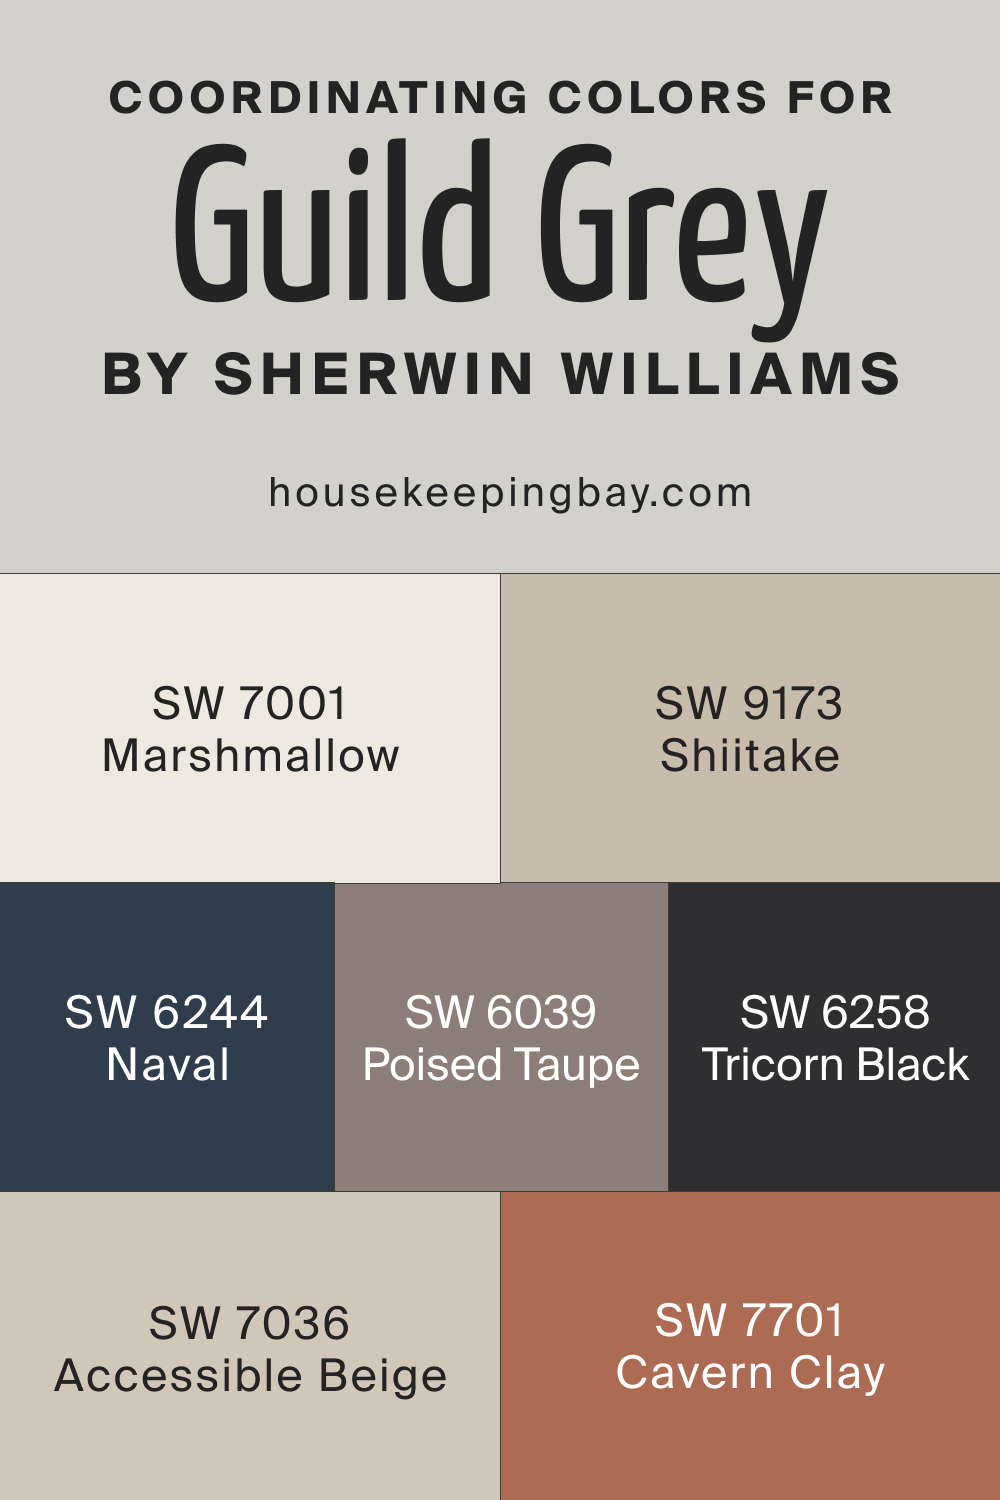 Coordinating Colors for SW 9561 Guild Grey by Sherwin Williams